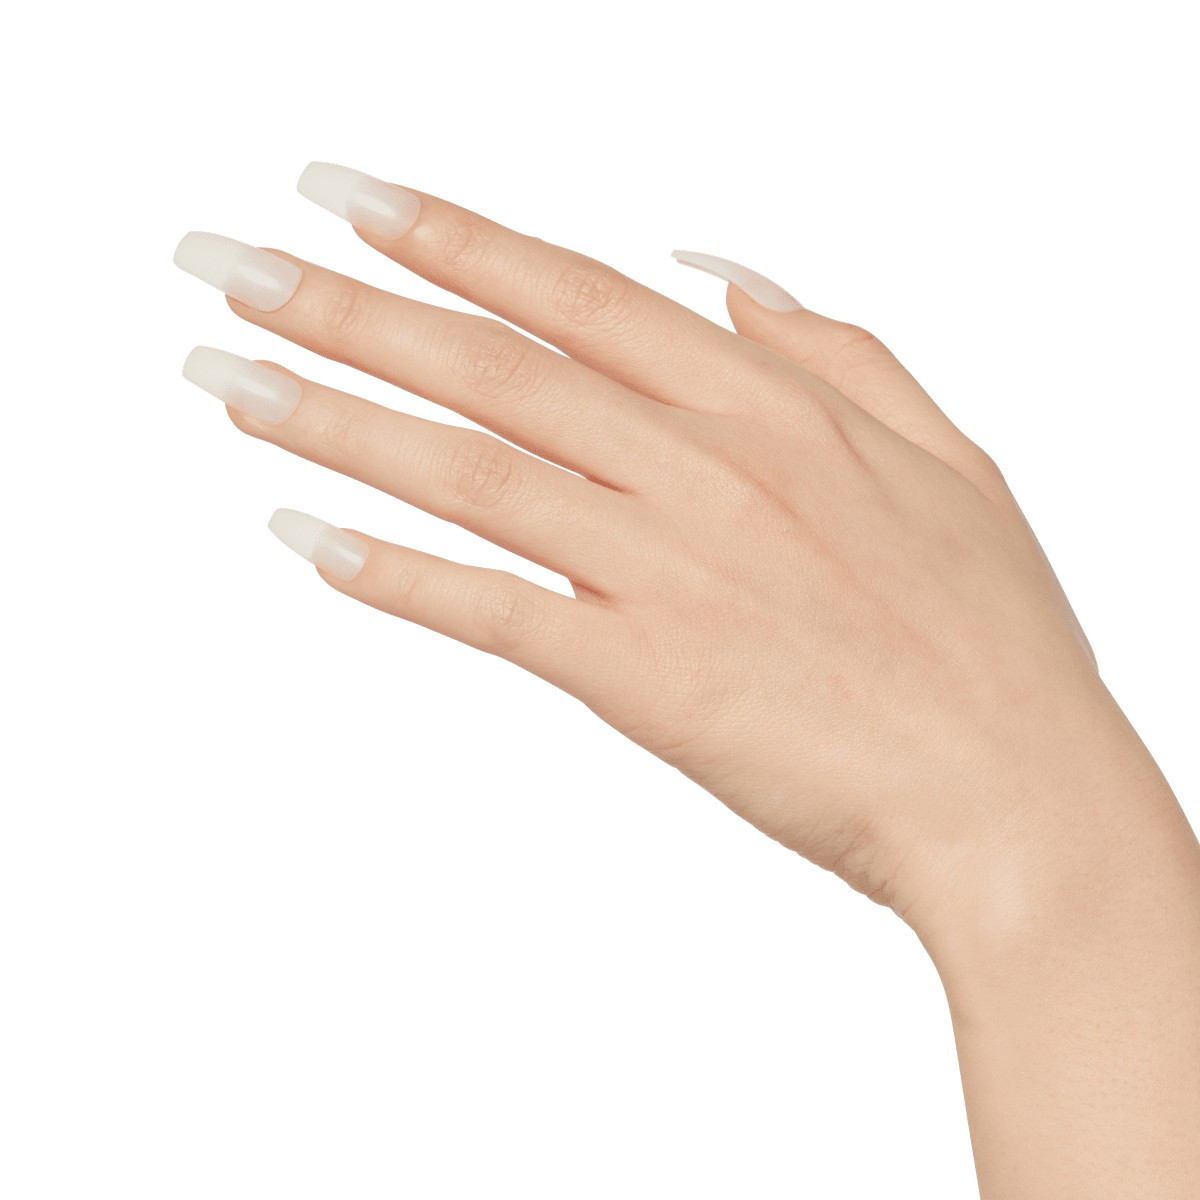 8 Different Types Of Manicures To Know